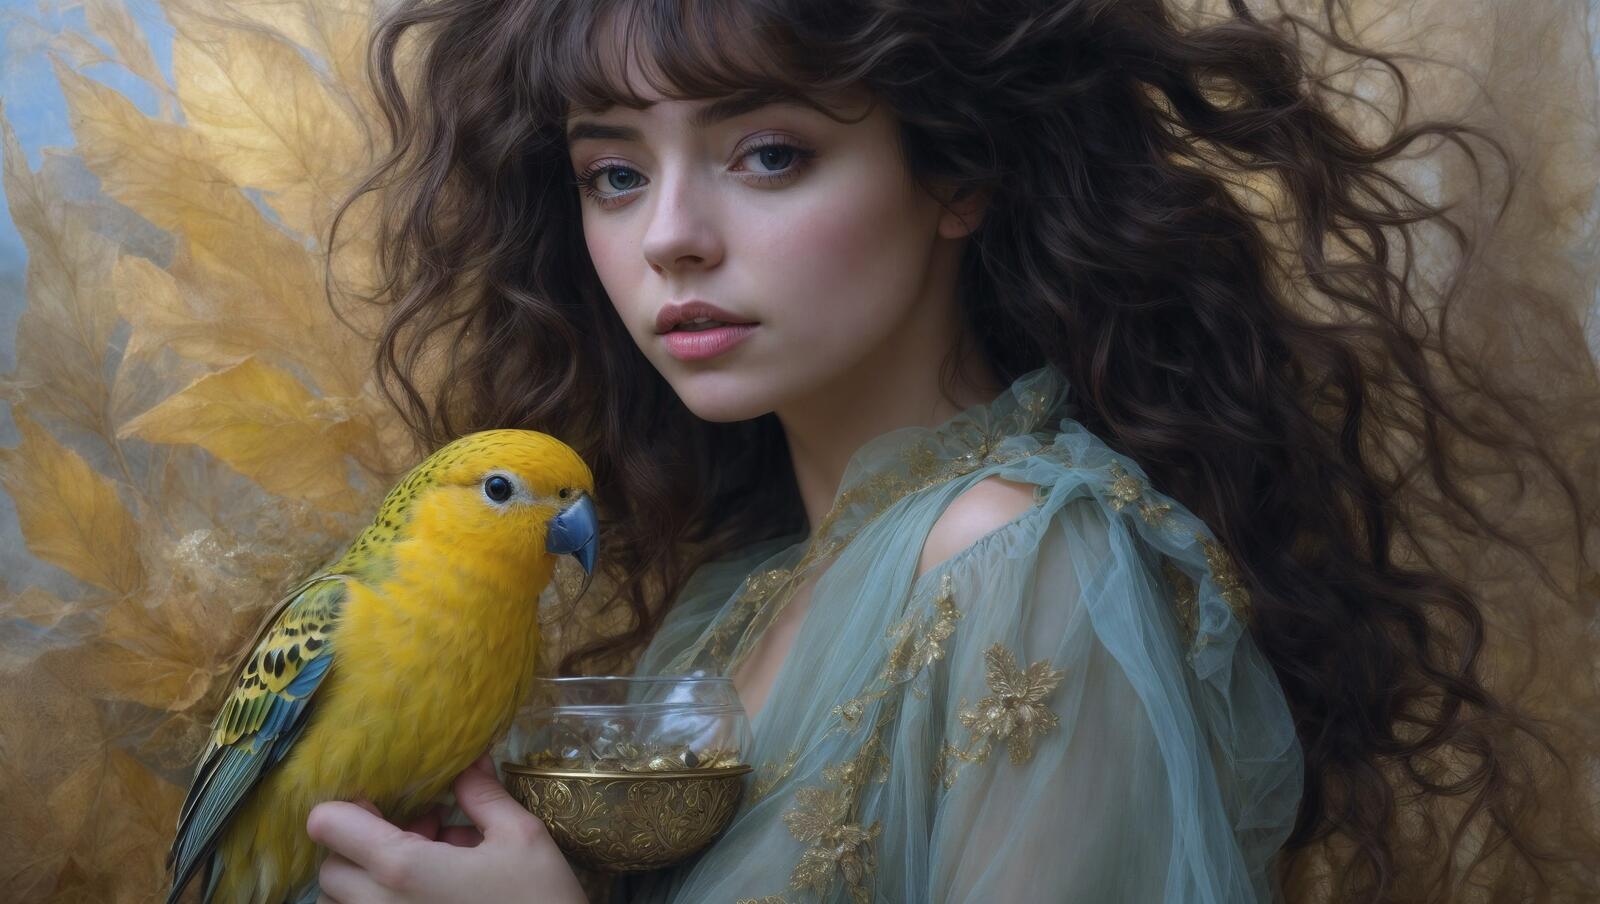 Free photo A beautiful woman with curly hair holding a bird